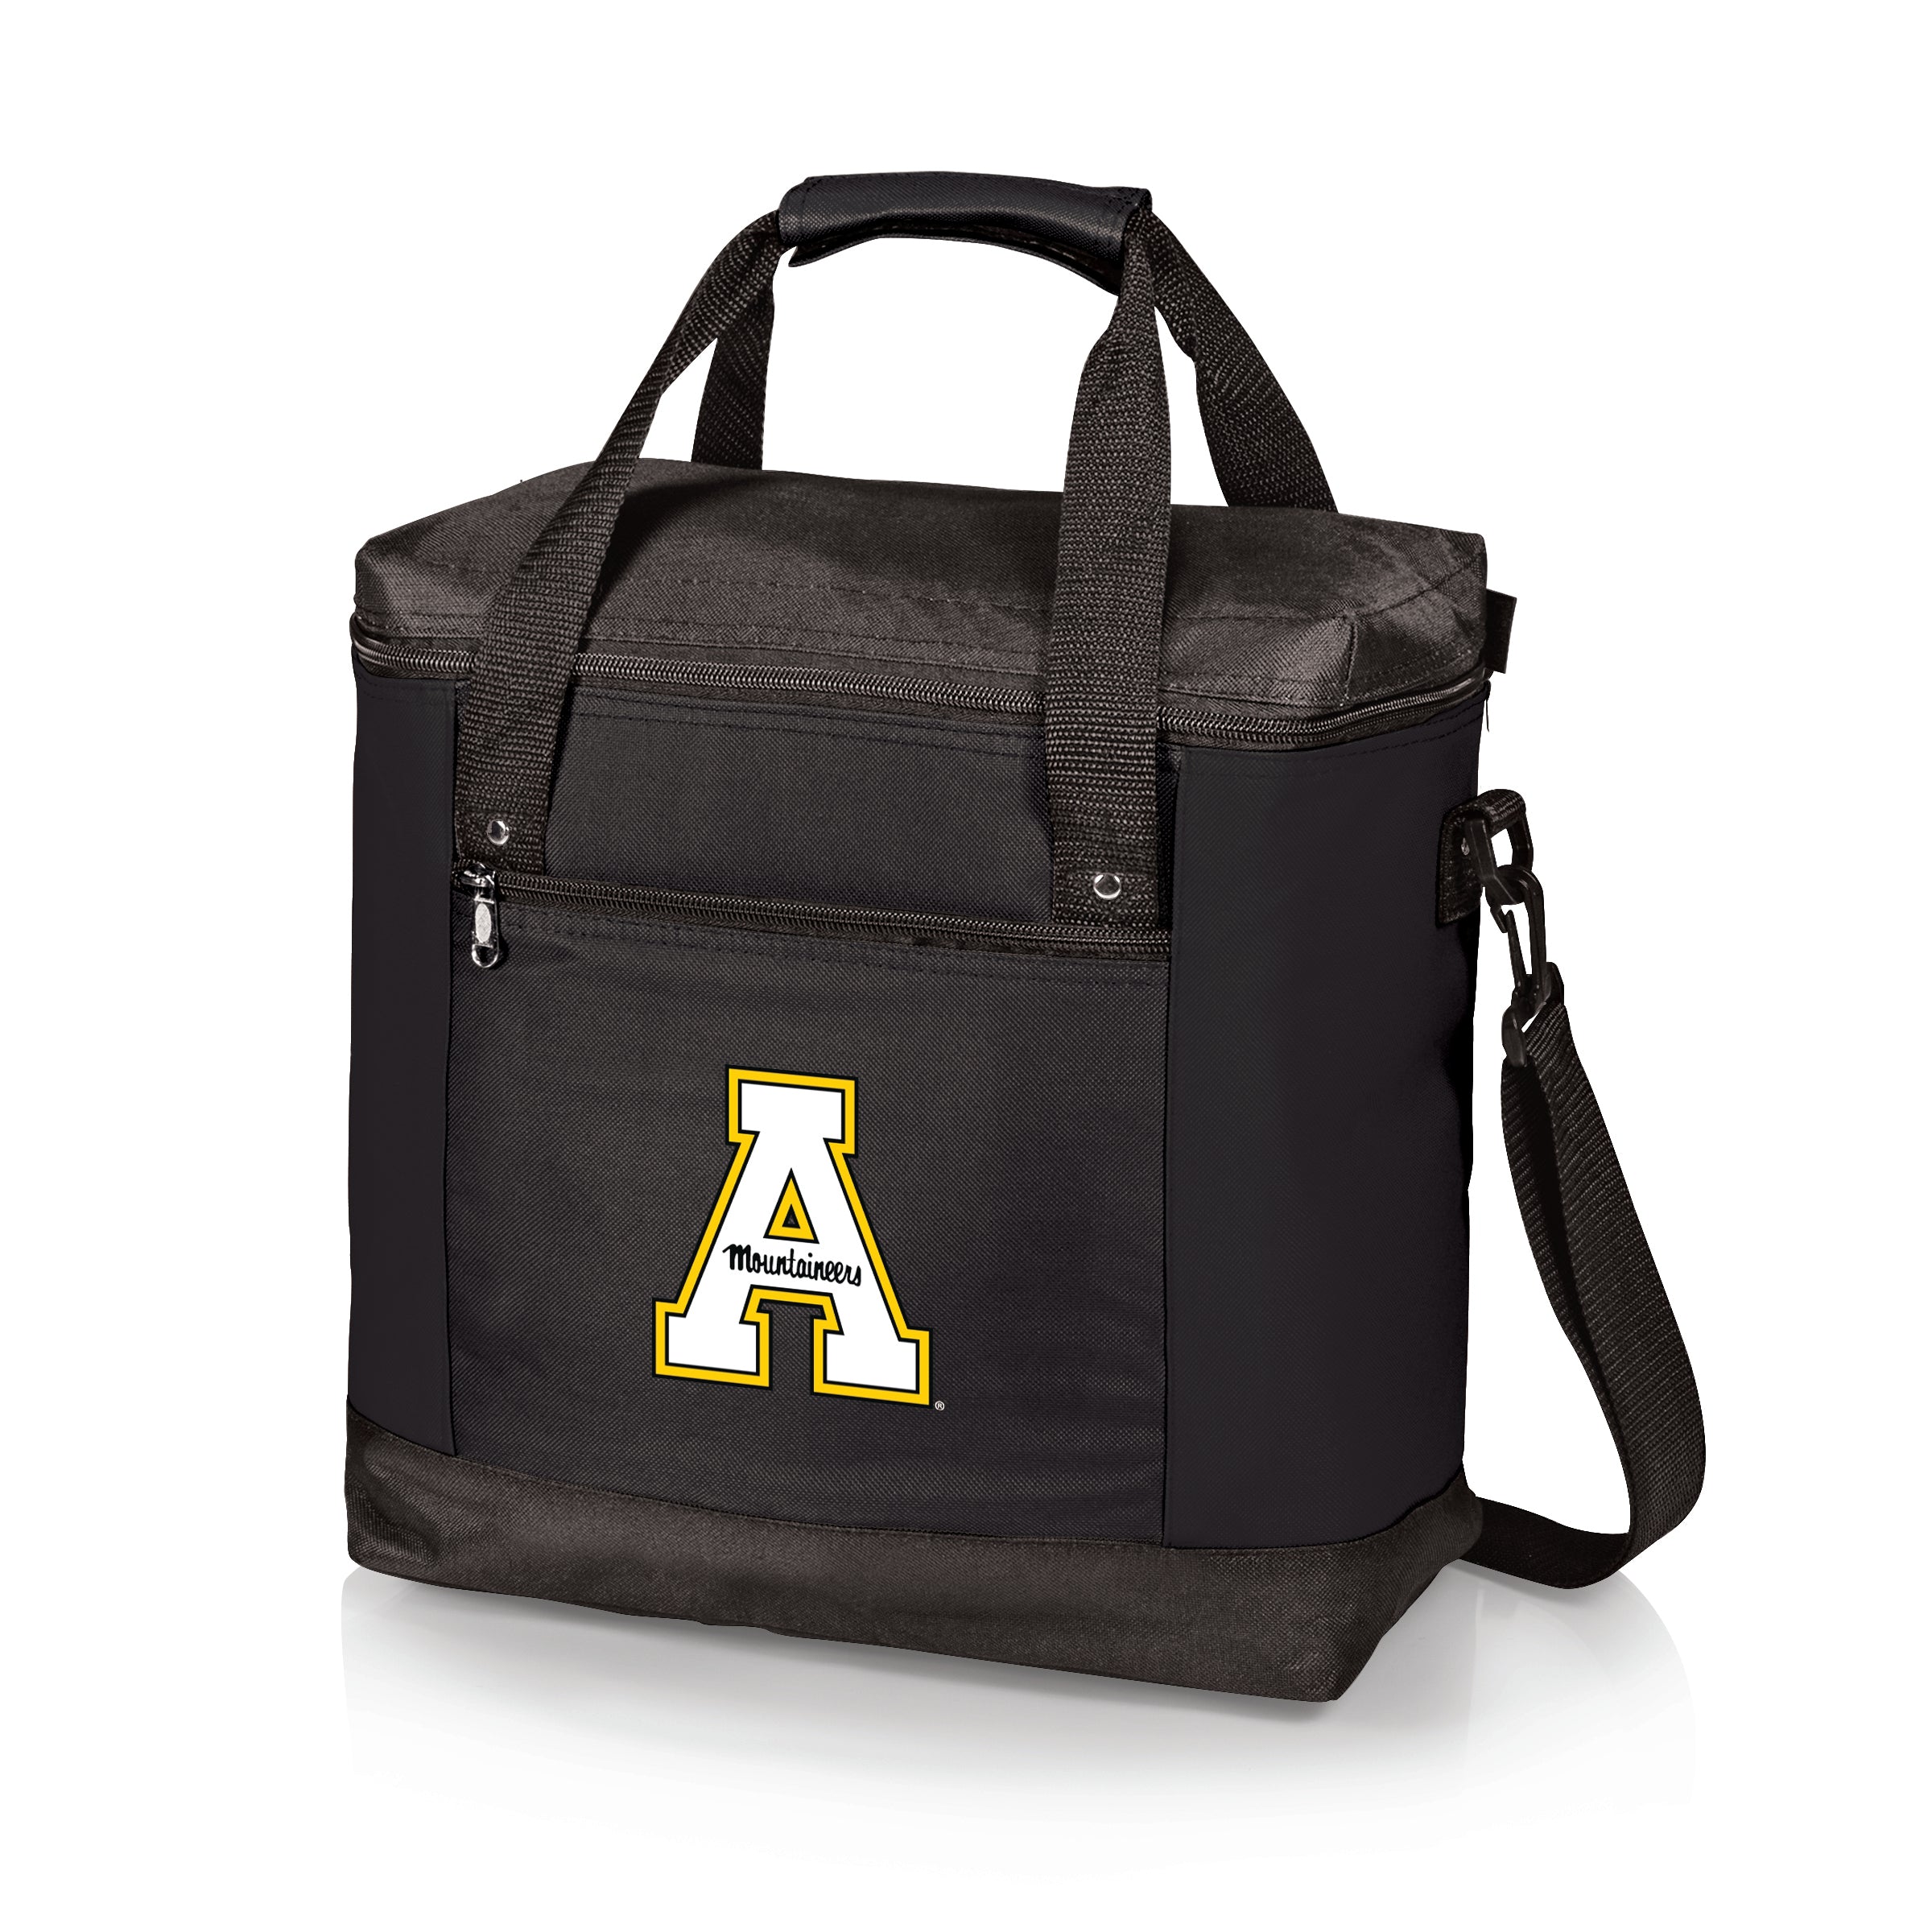 App State Mountaineers - Montero Cooler Tote Bag